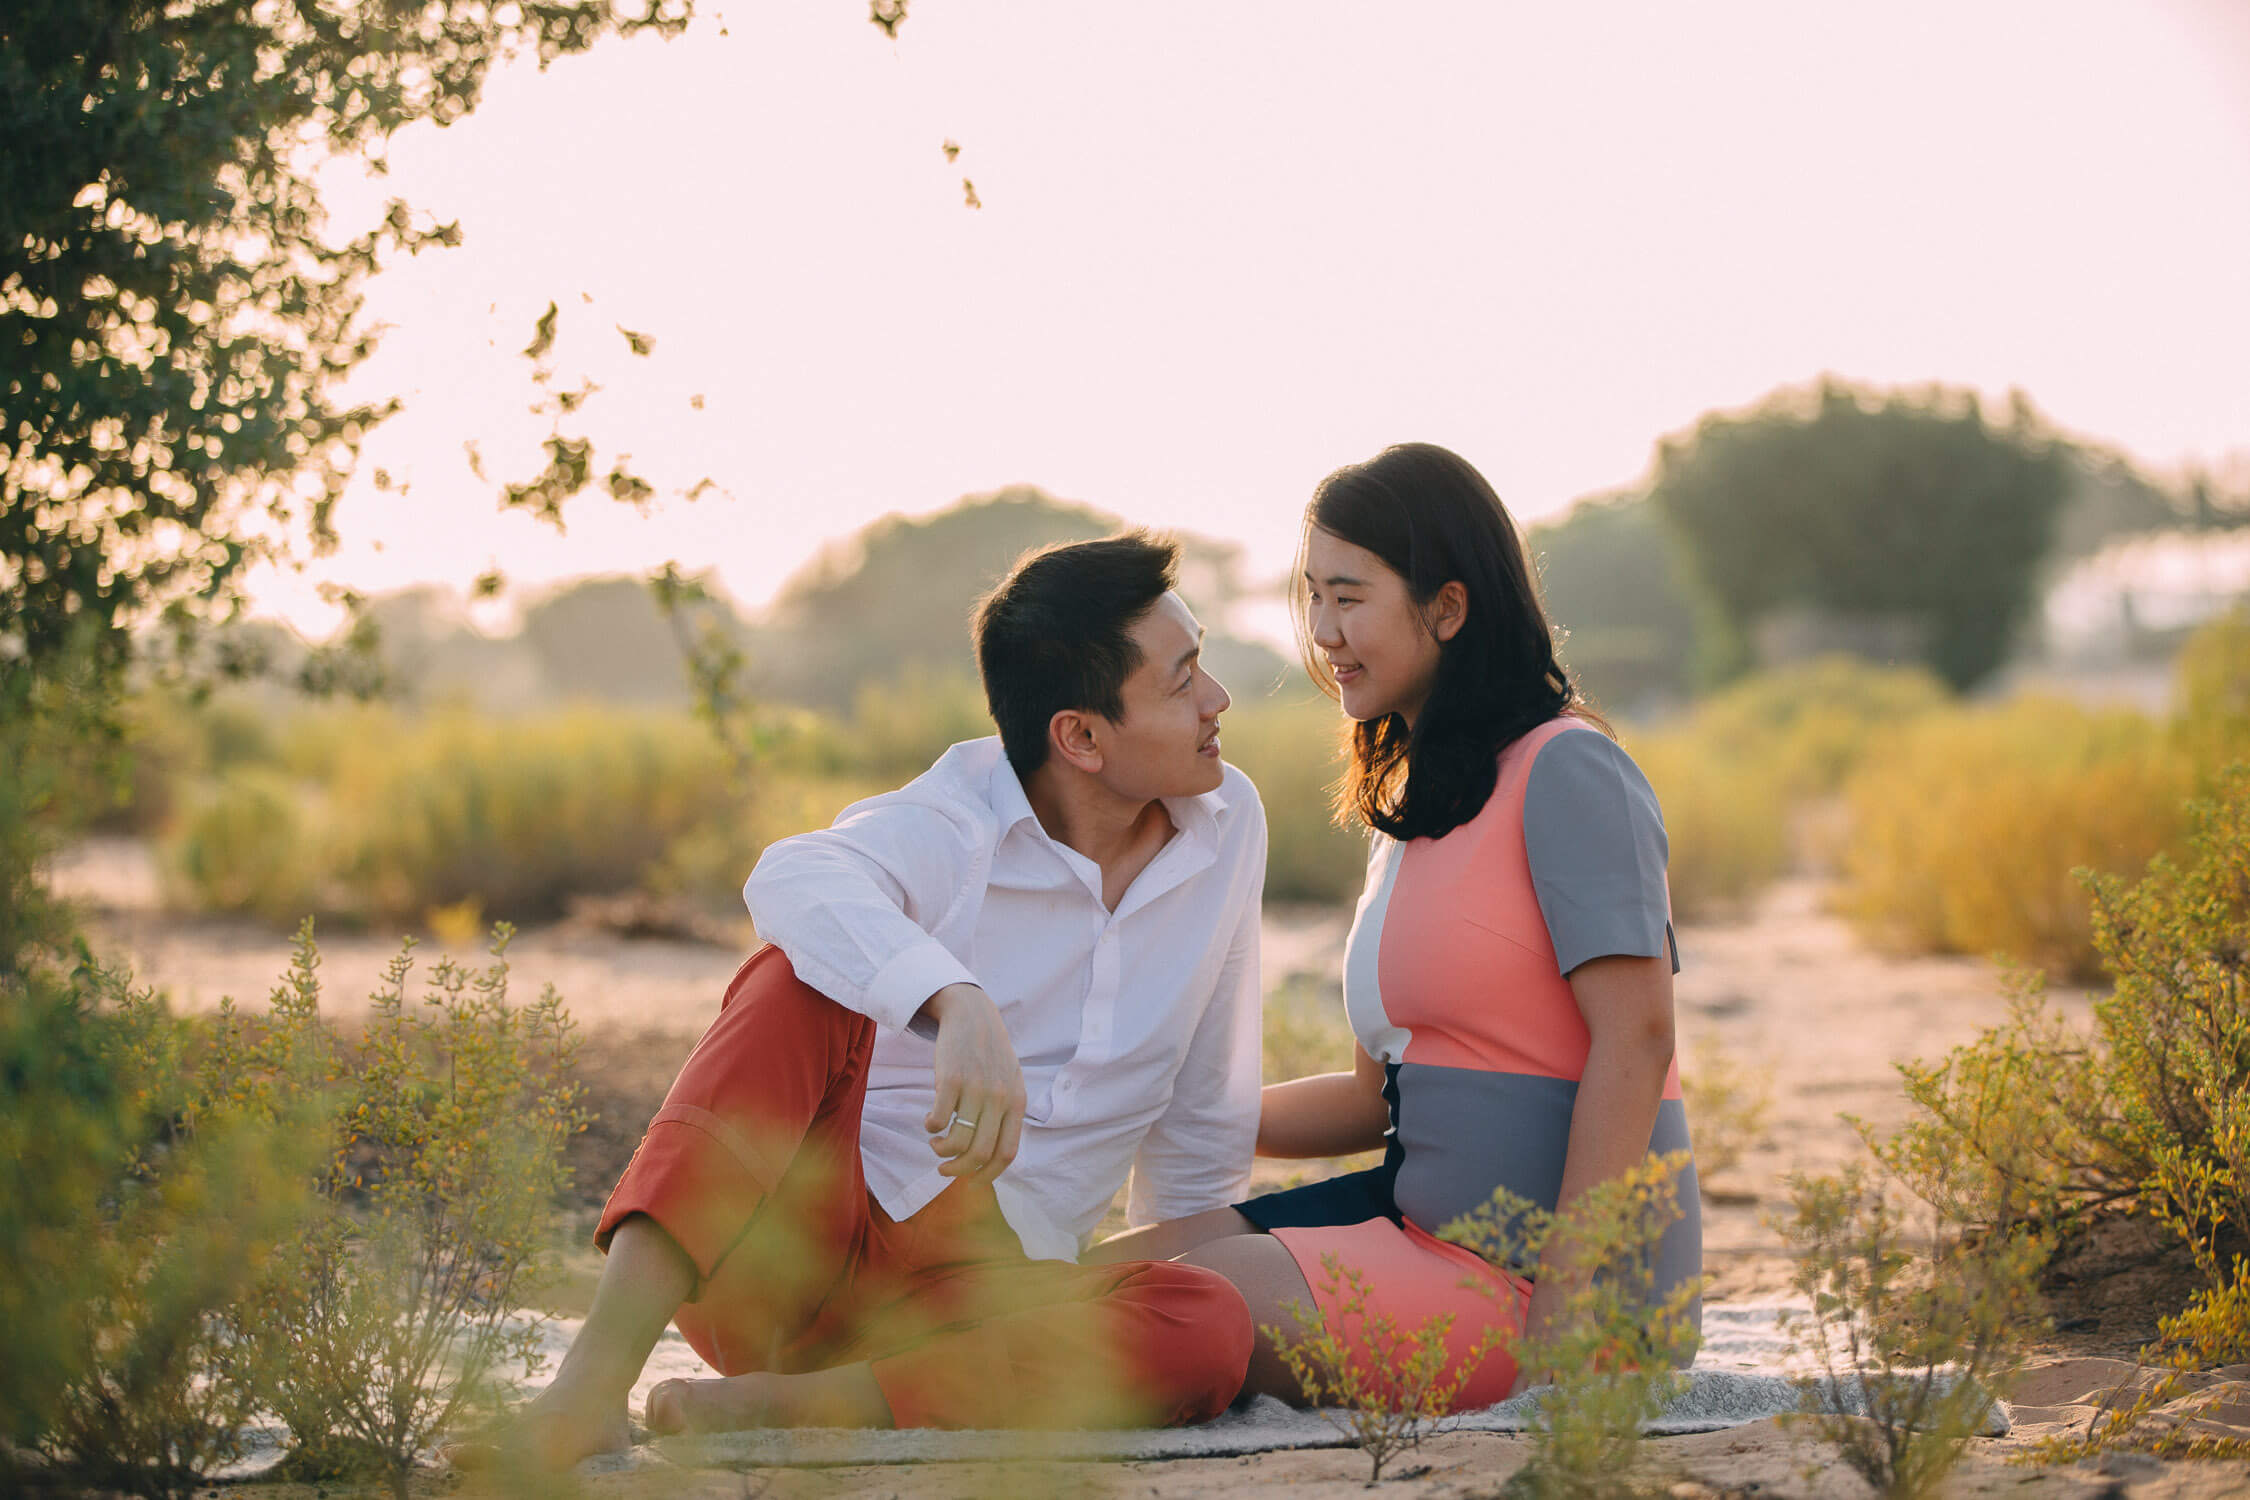 Premium Photo | Young couple in love outdoors. stunning sensual outdoor  portrait of young fashionable young fashionable posing during summer in  field with sunset